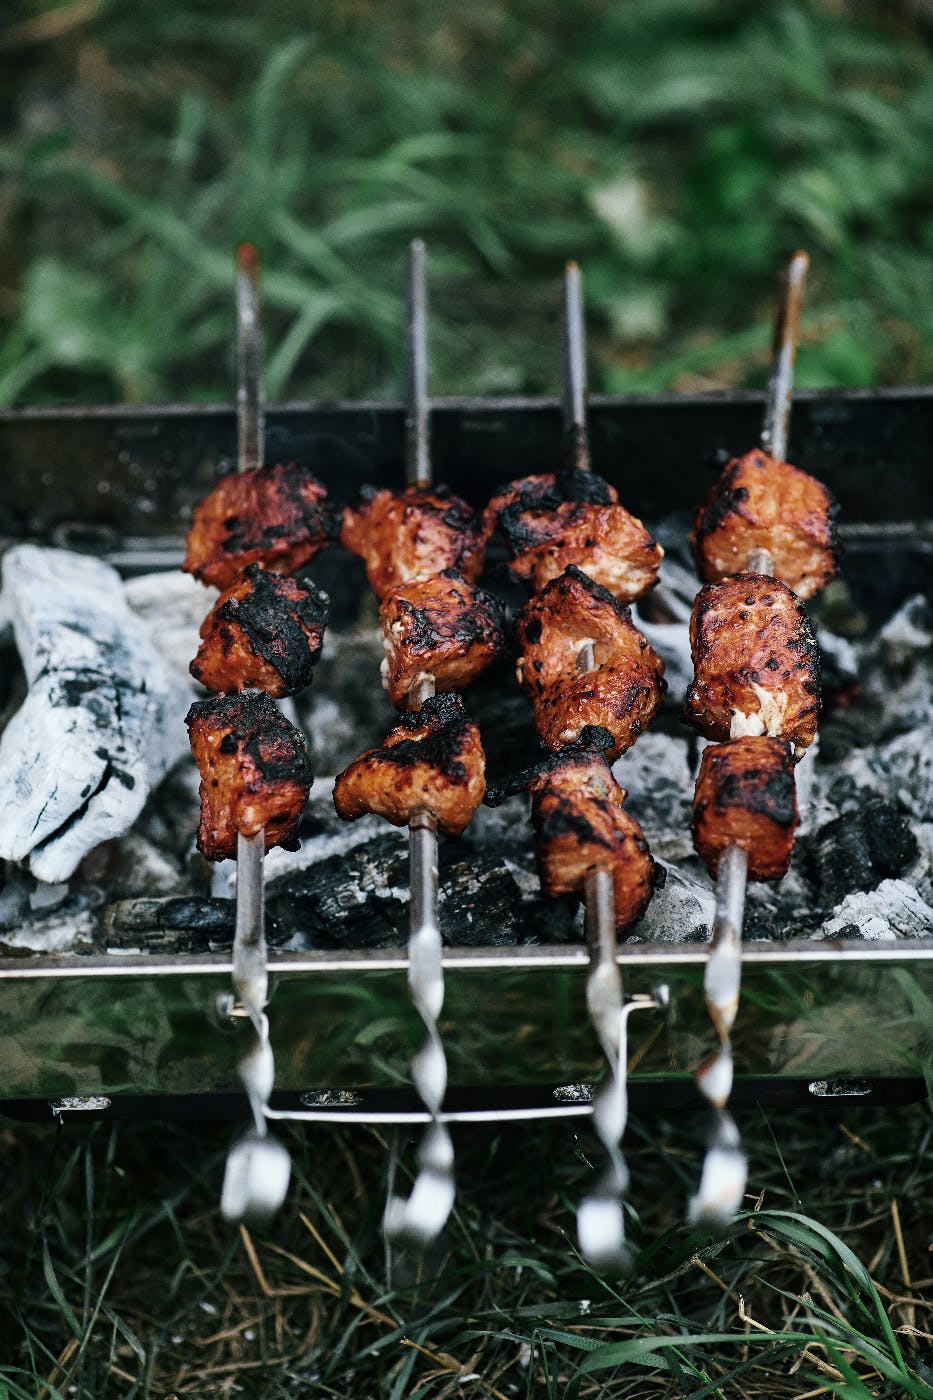 Chicken on metal skewers cooking over a wood fire